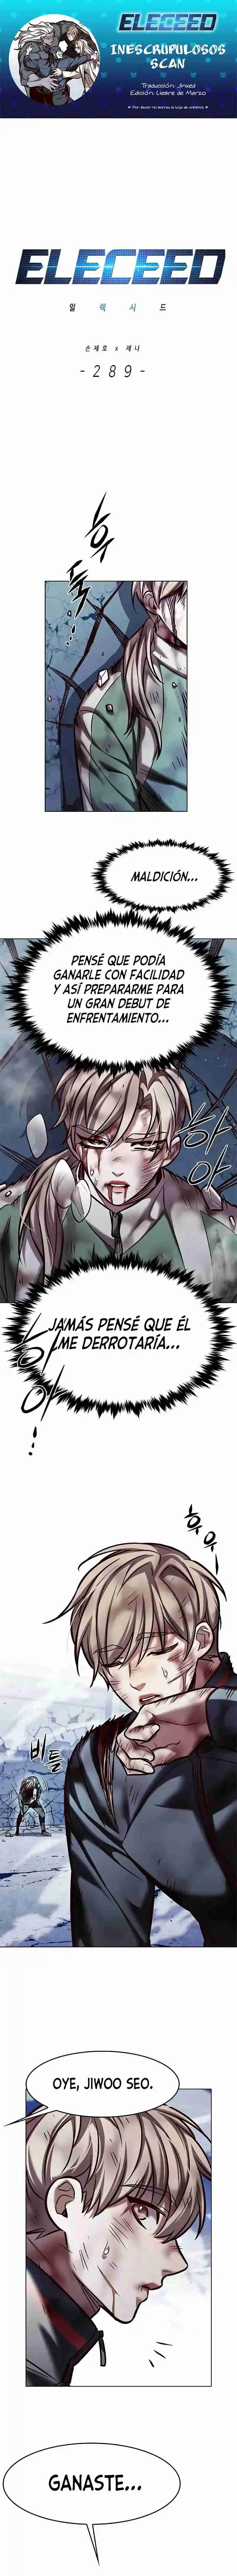 Electricidad veloz: Chapter 289 - Page 1